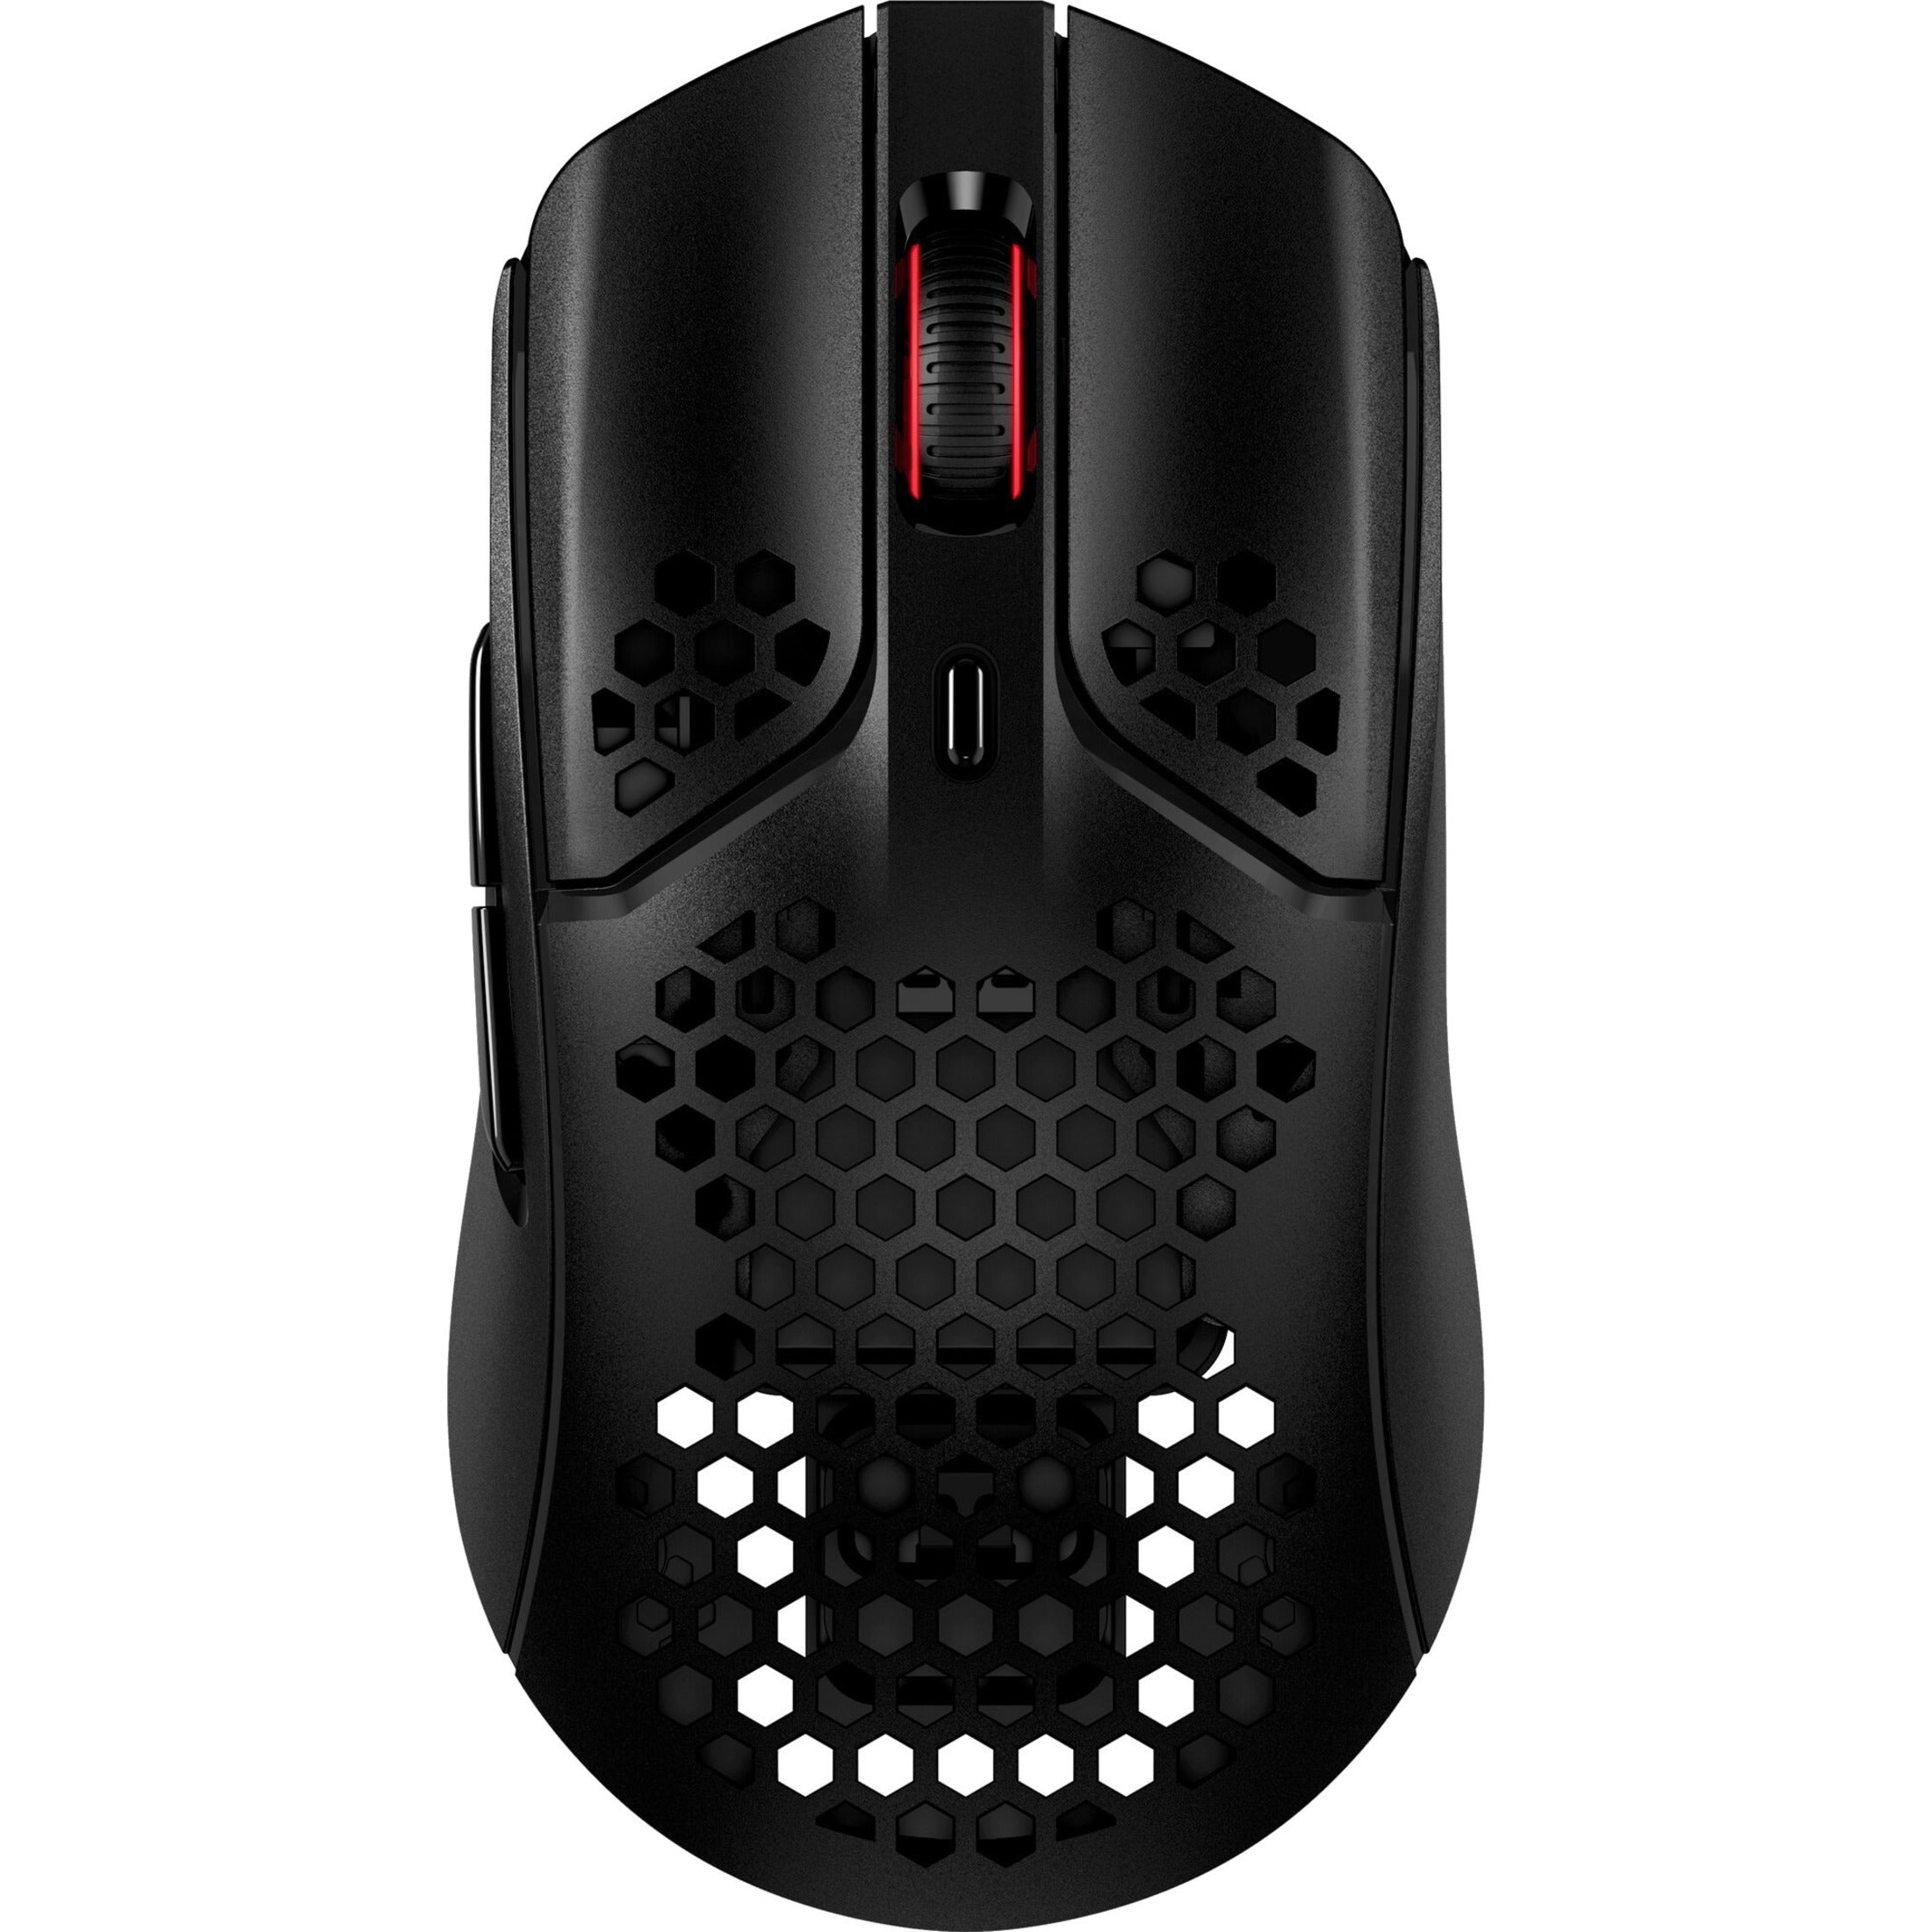 HyperX 4P5D7AA Pulsefire Haste Gaming Mouse, Symmetrical Design, 16000 DPI, Wireless/Cable Connectivity